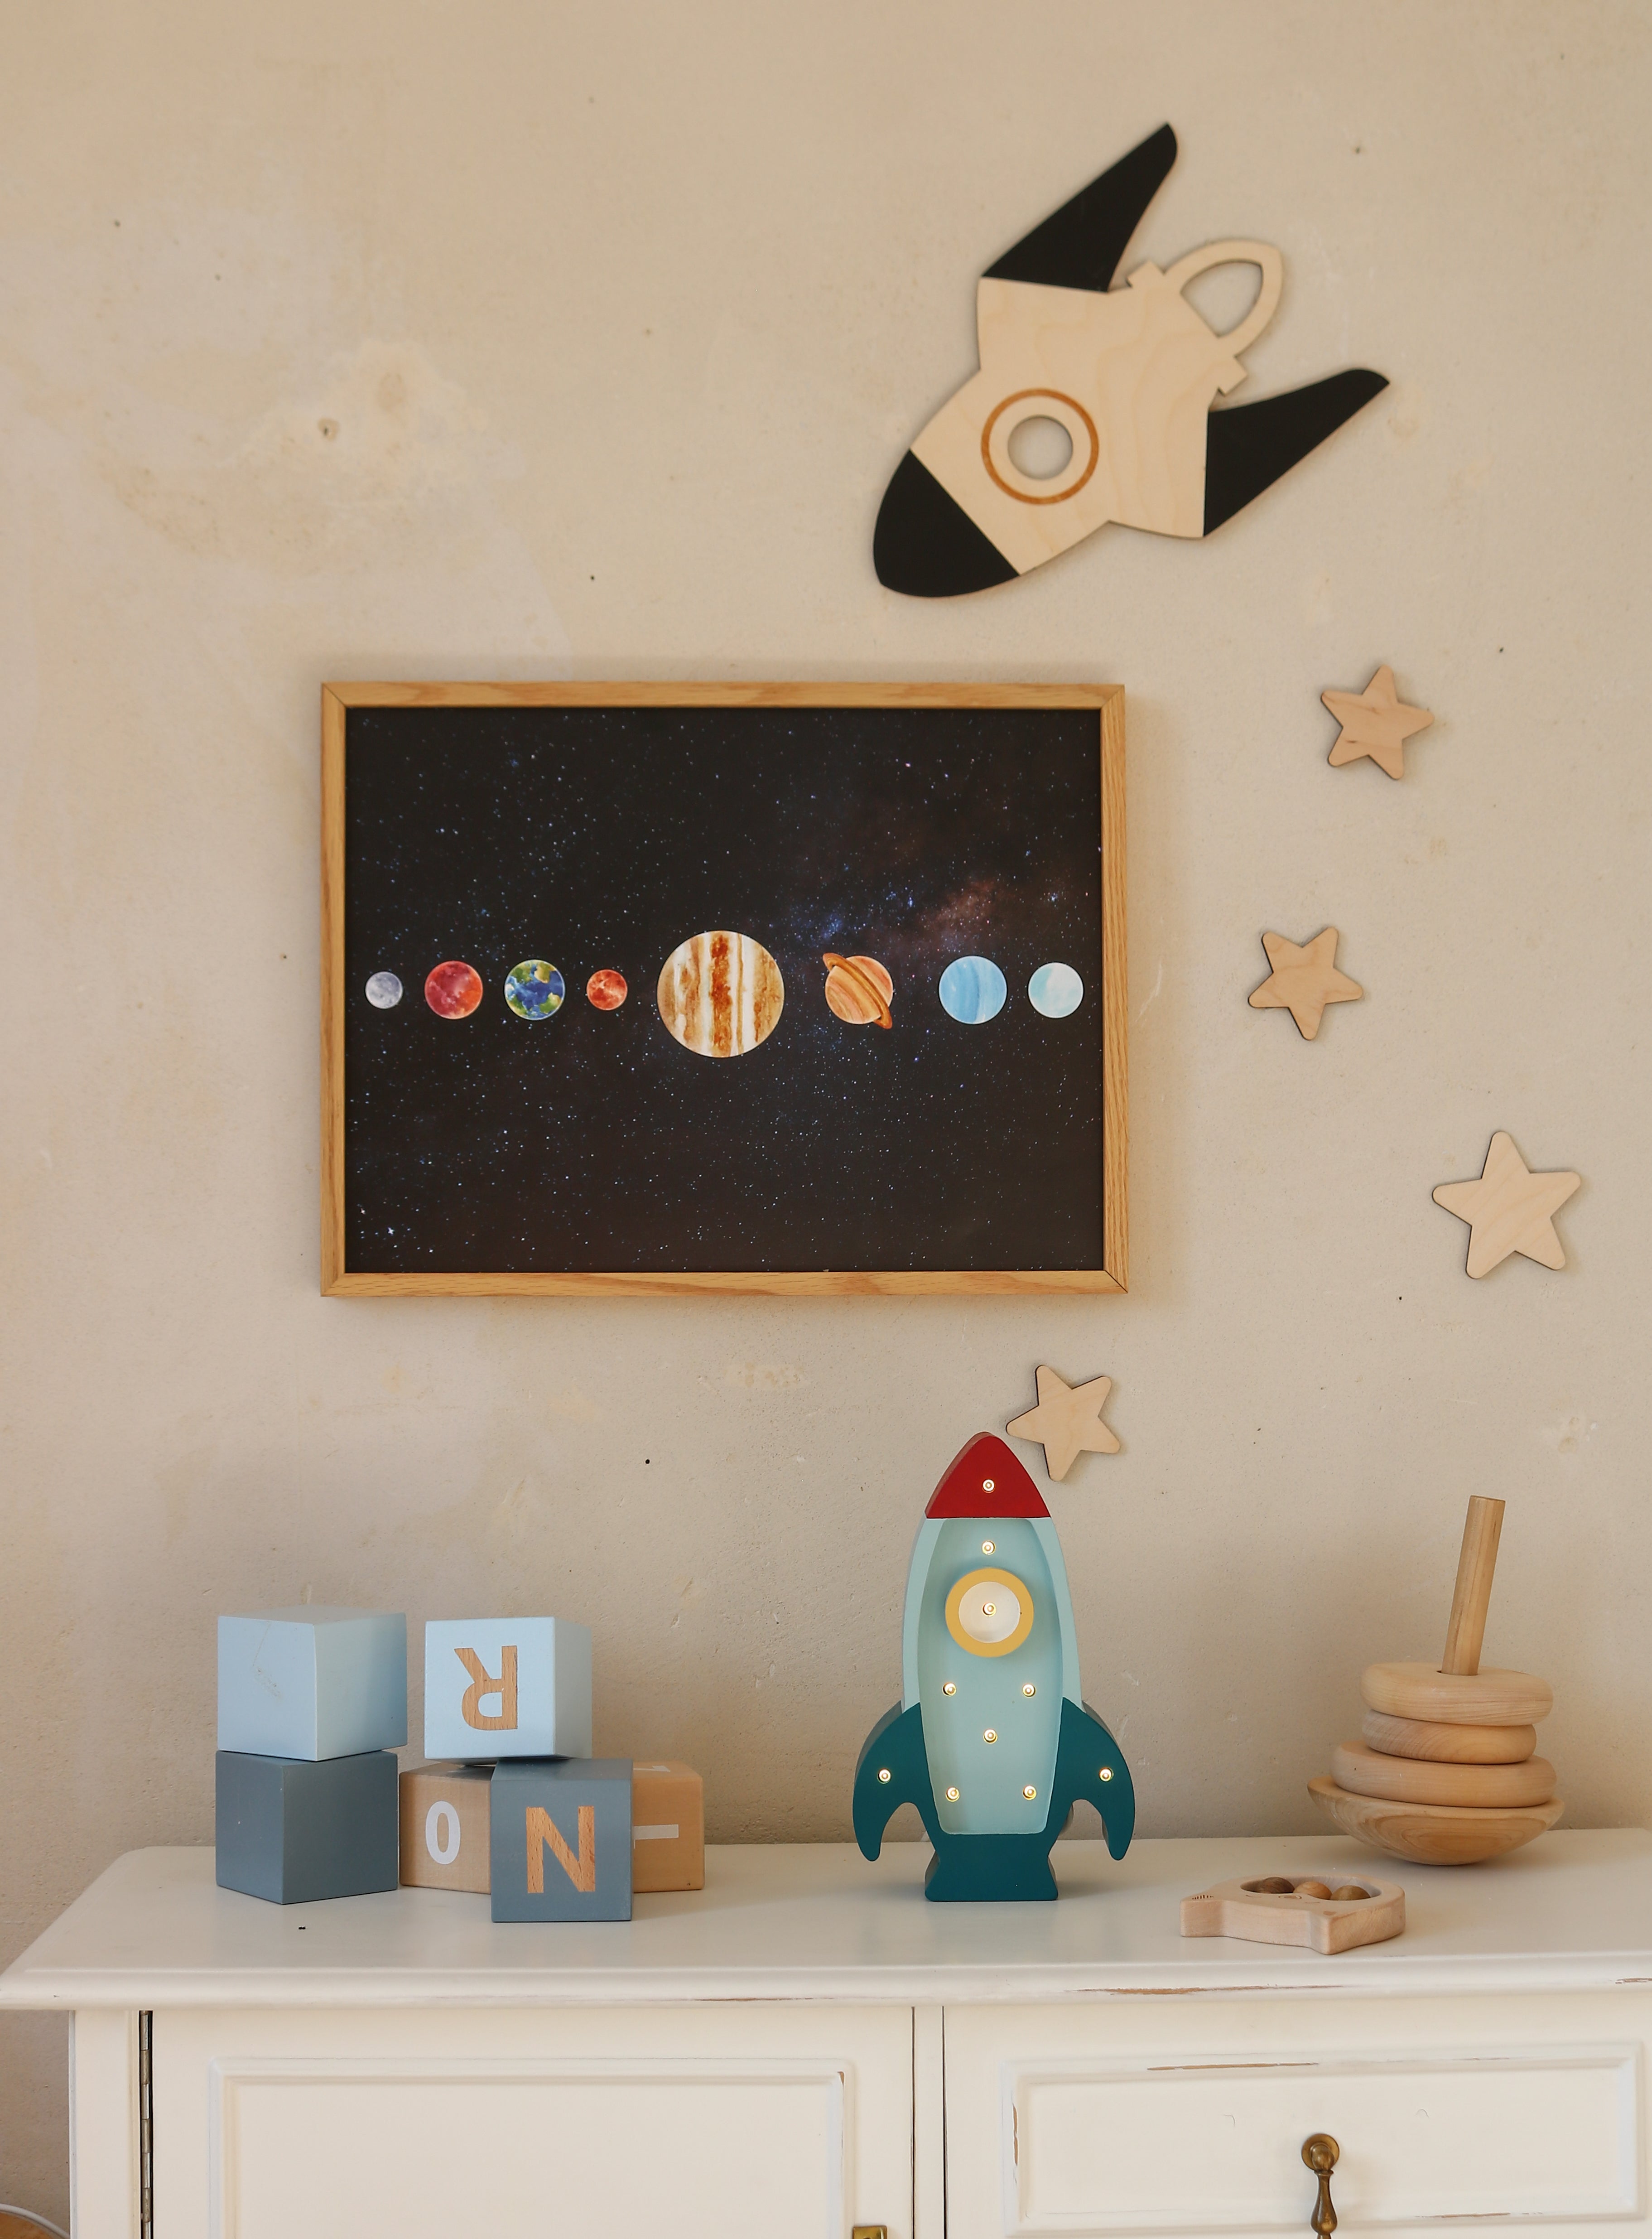 Little Lights Space Rocket Mini Lamp in Teal - Child-friendly LED night lights